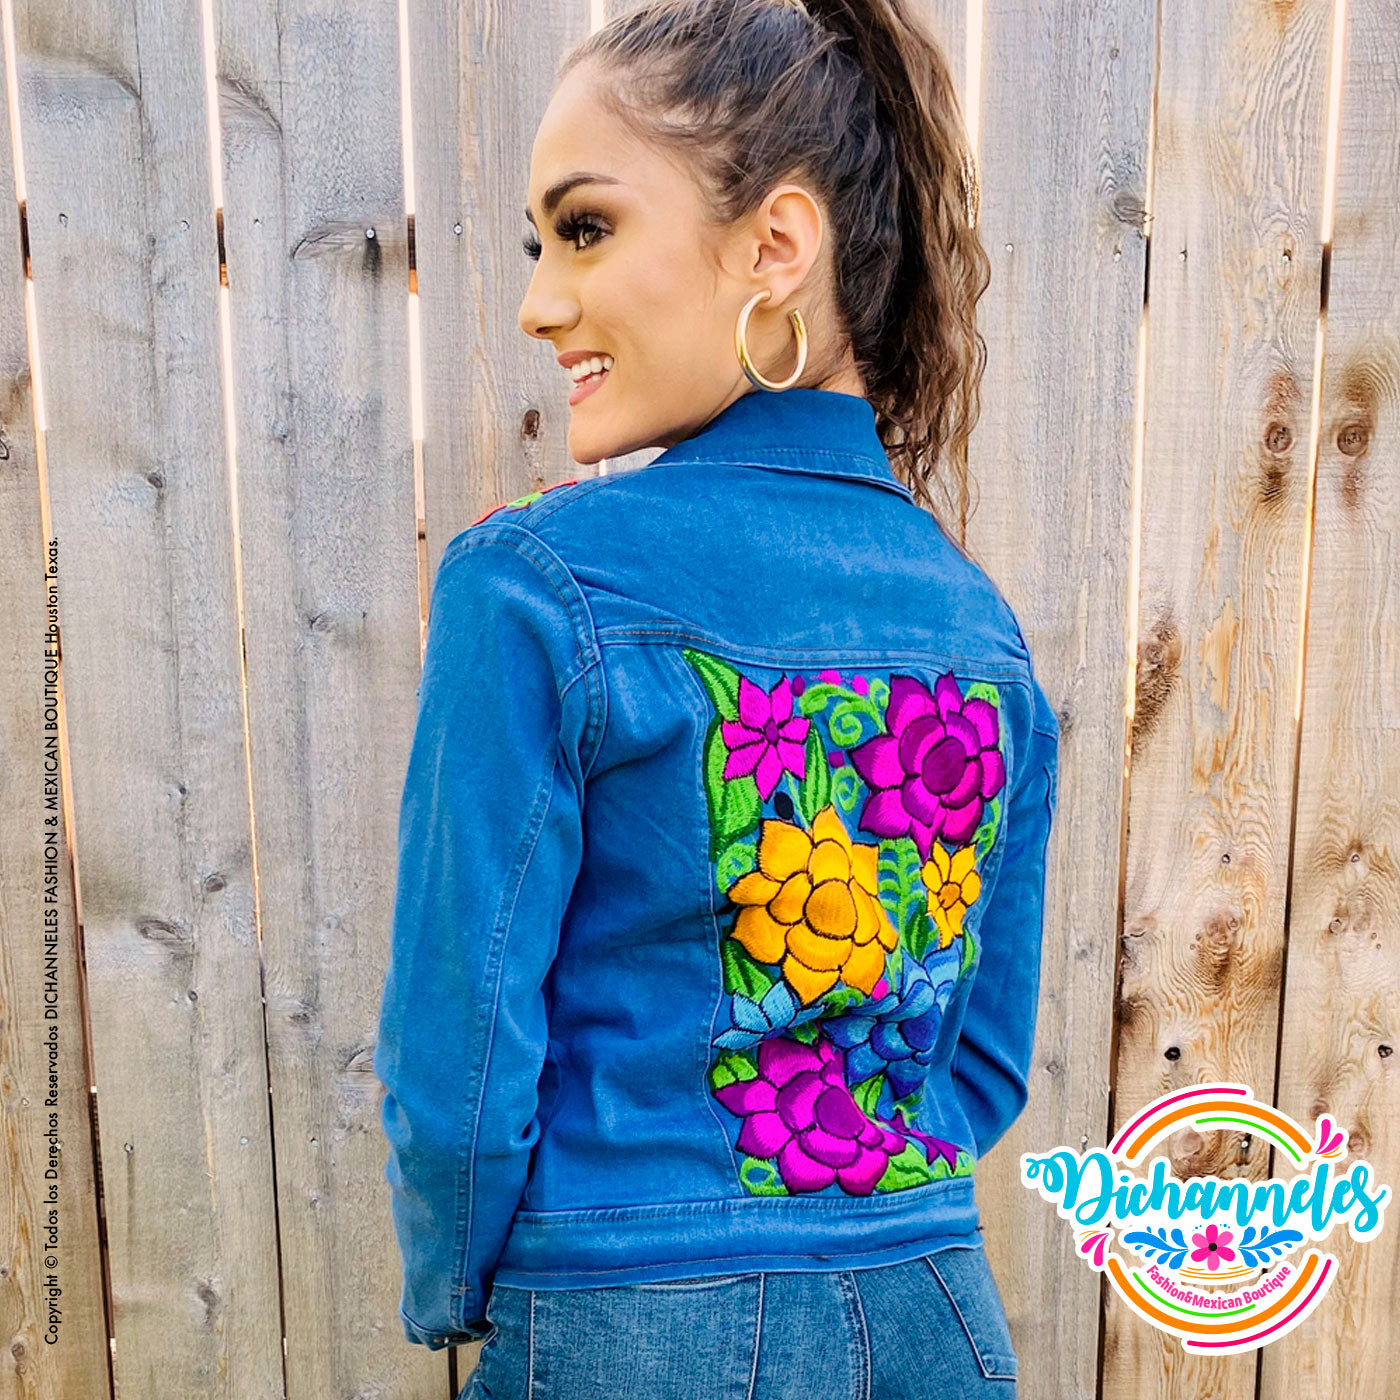 Denim Embroidered Jacket Colorful Flowers Que Bonito Mexican and Fashion